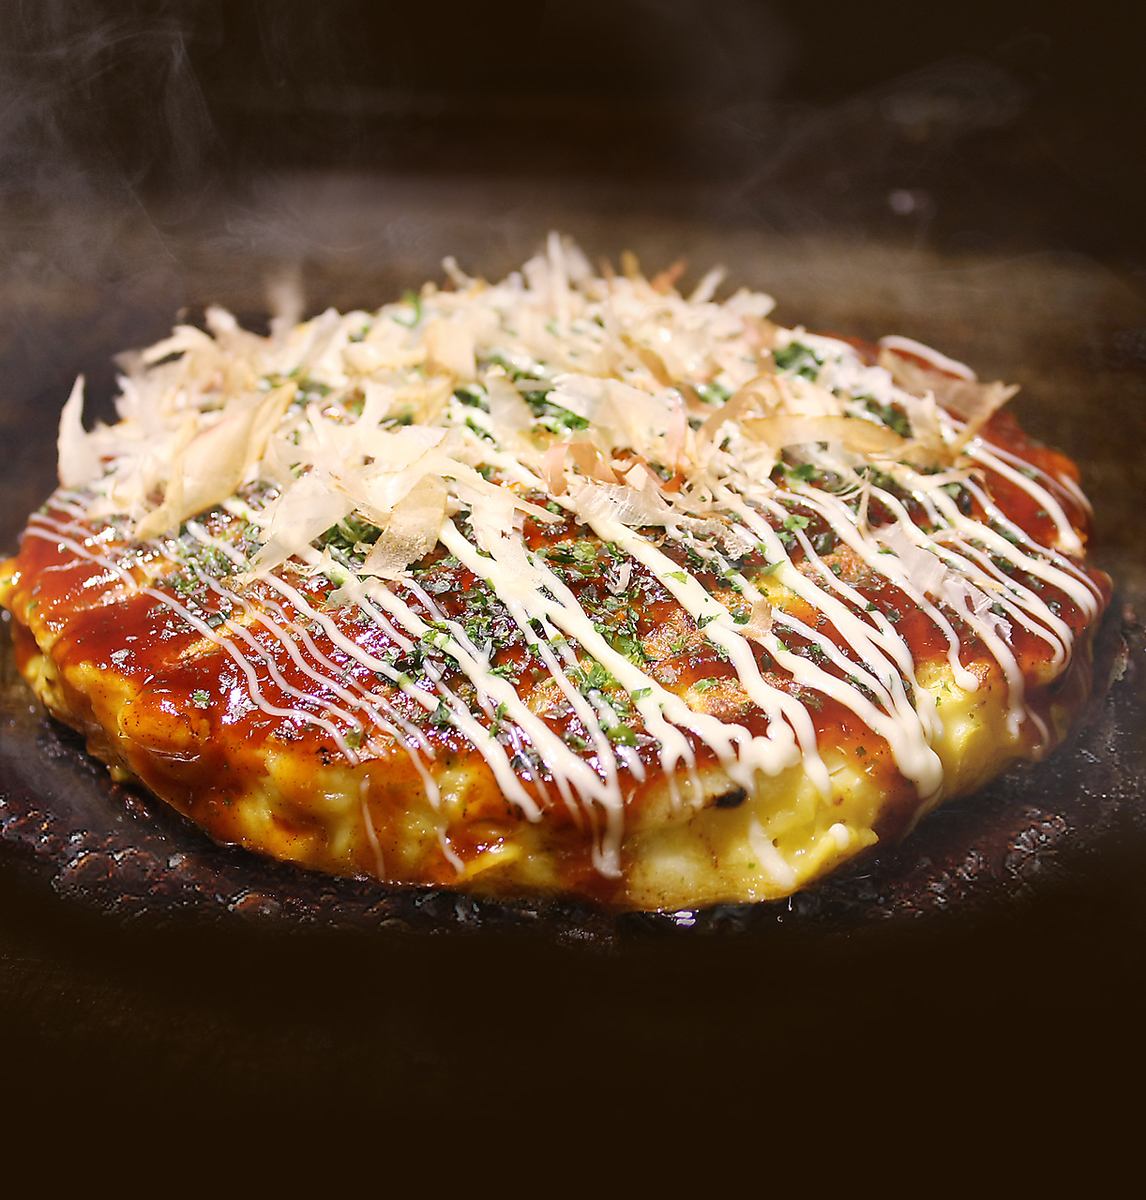 The secret of the deliciousness of the popular okonomiyaki lies in the special sauce and dough!